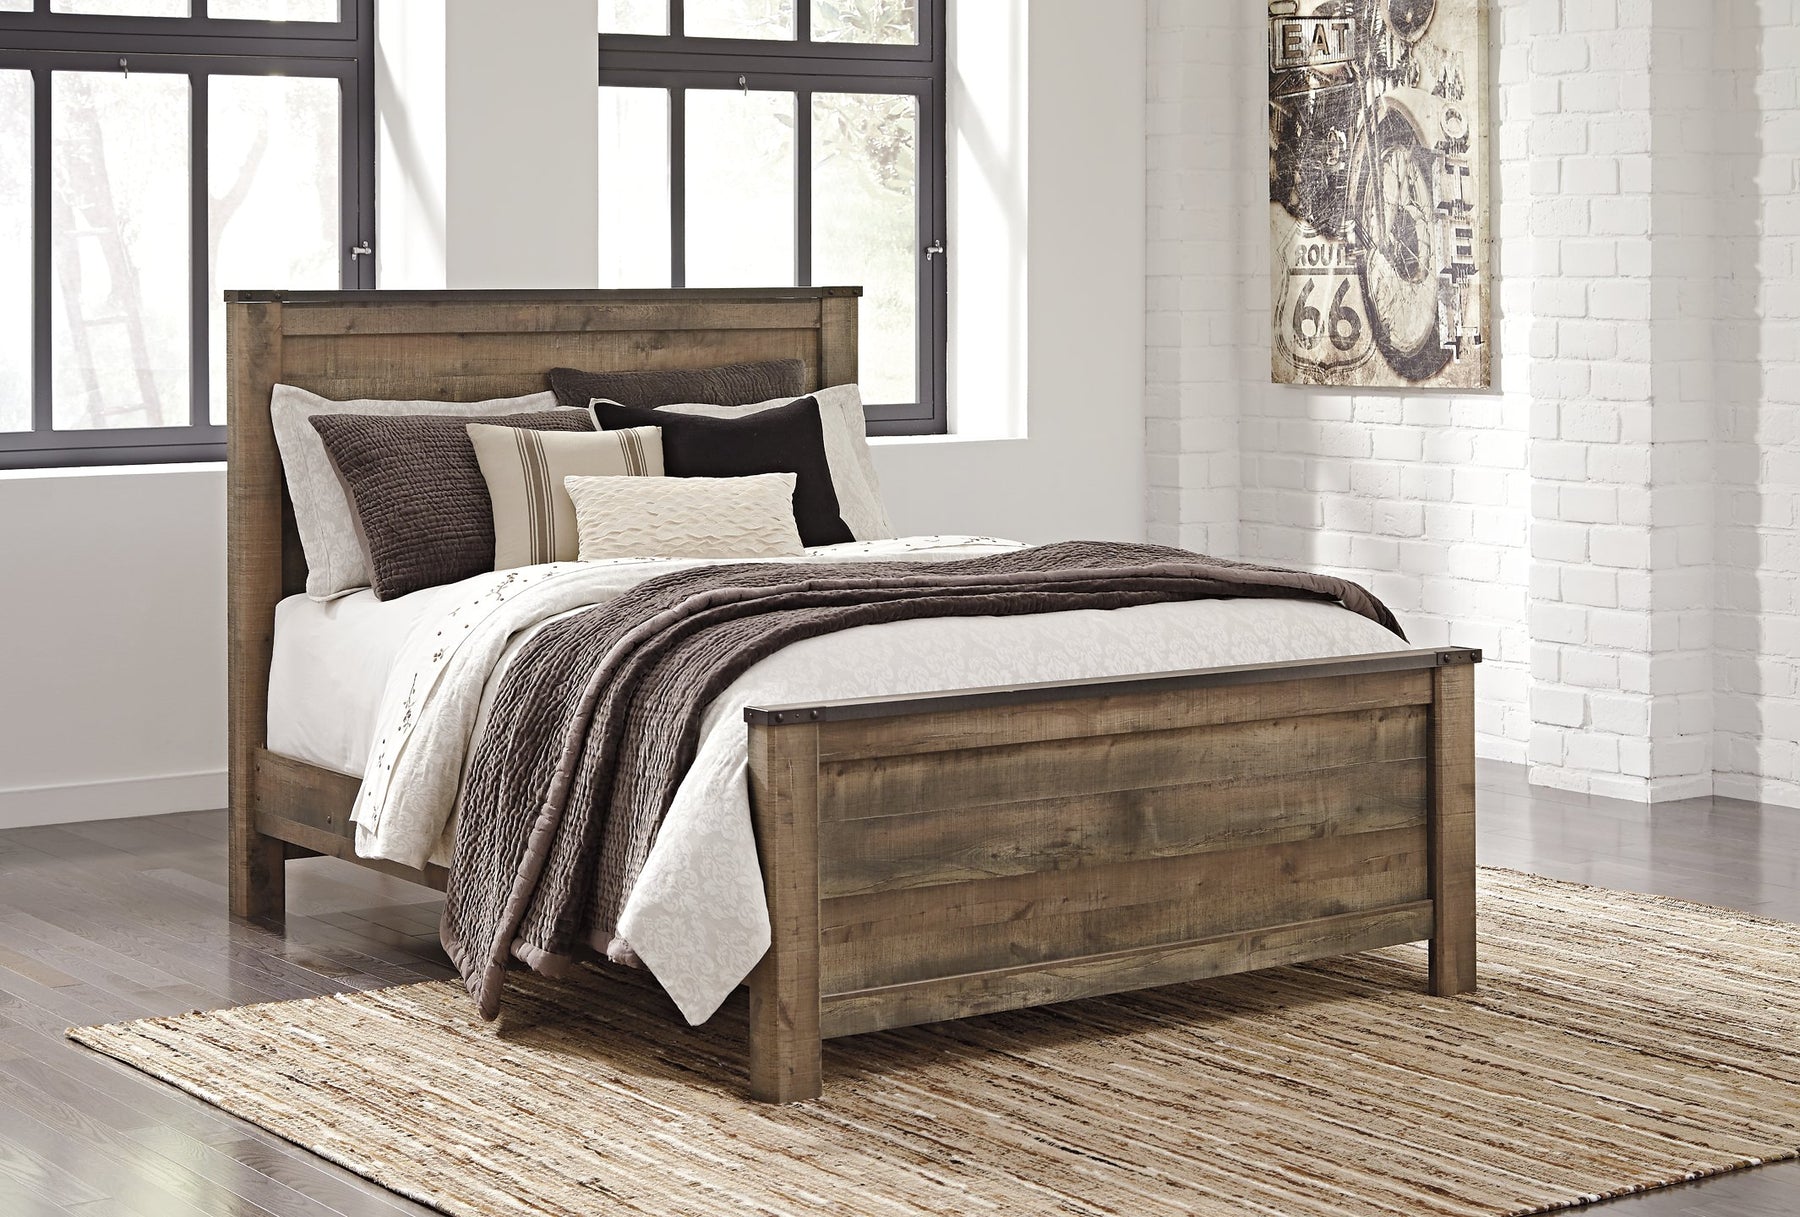 Trinell Bed - Half Price Furniture